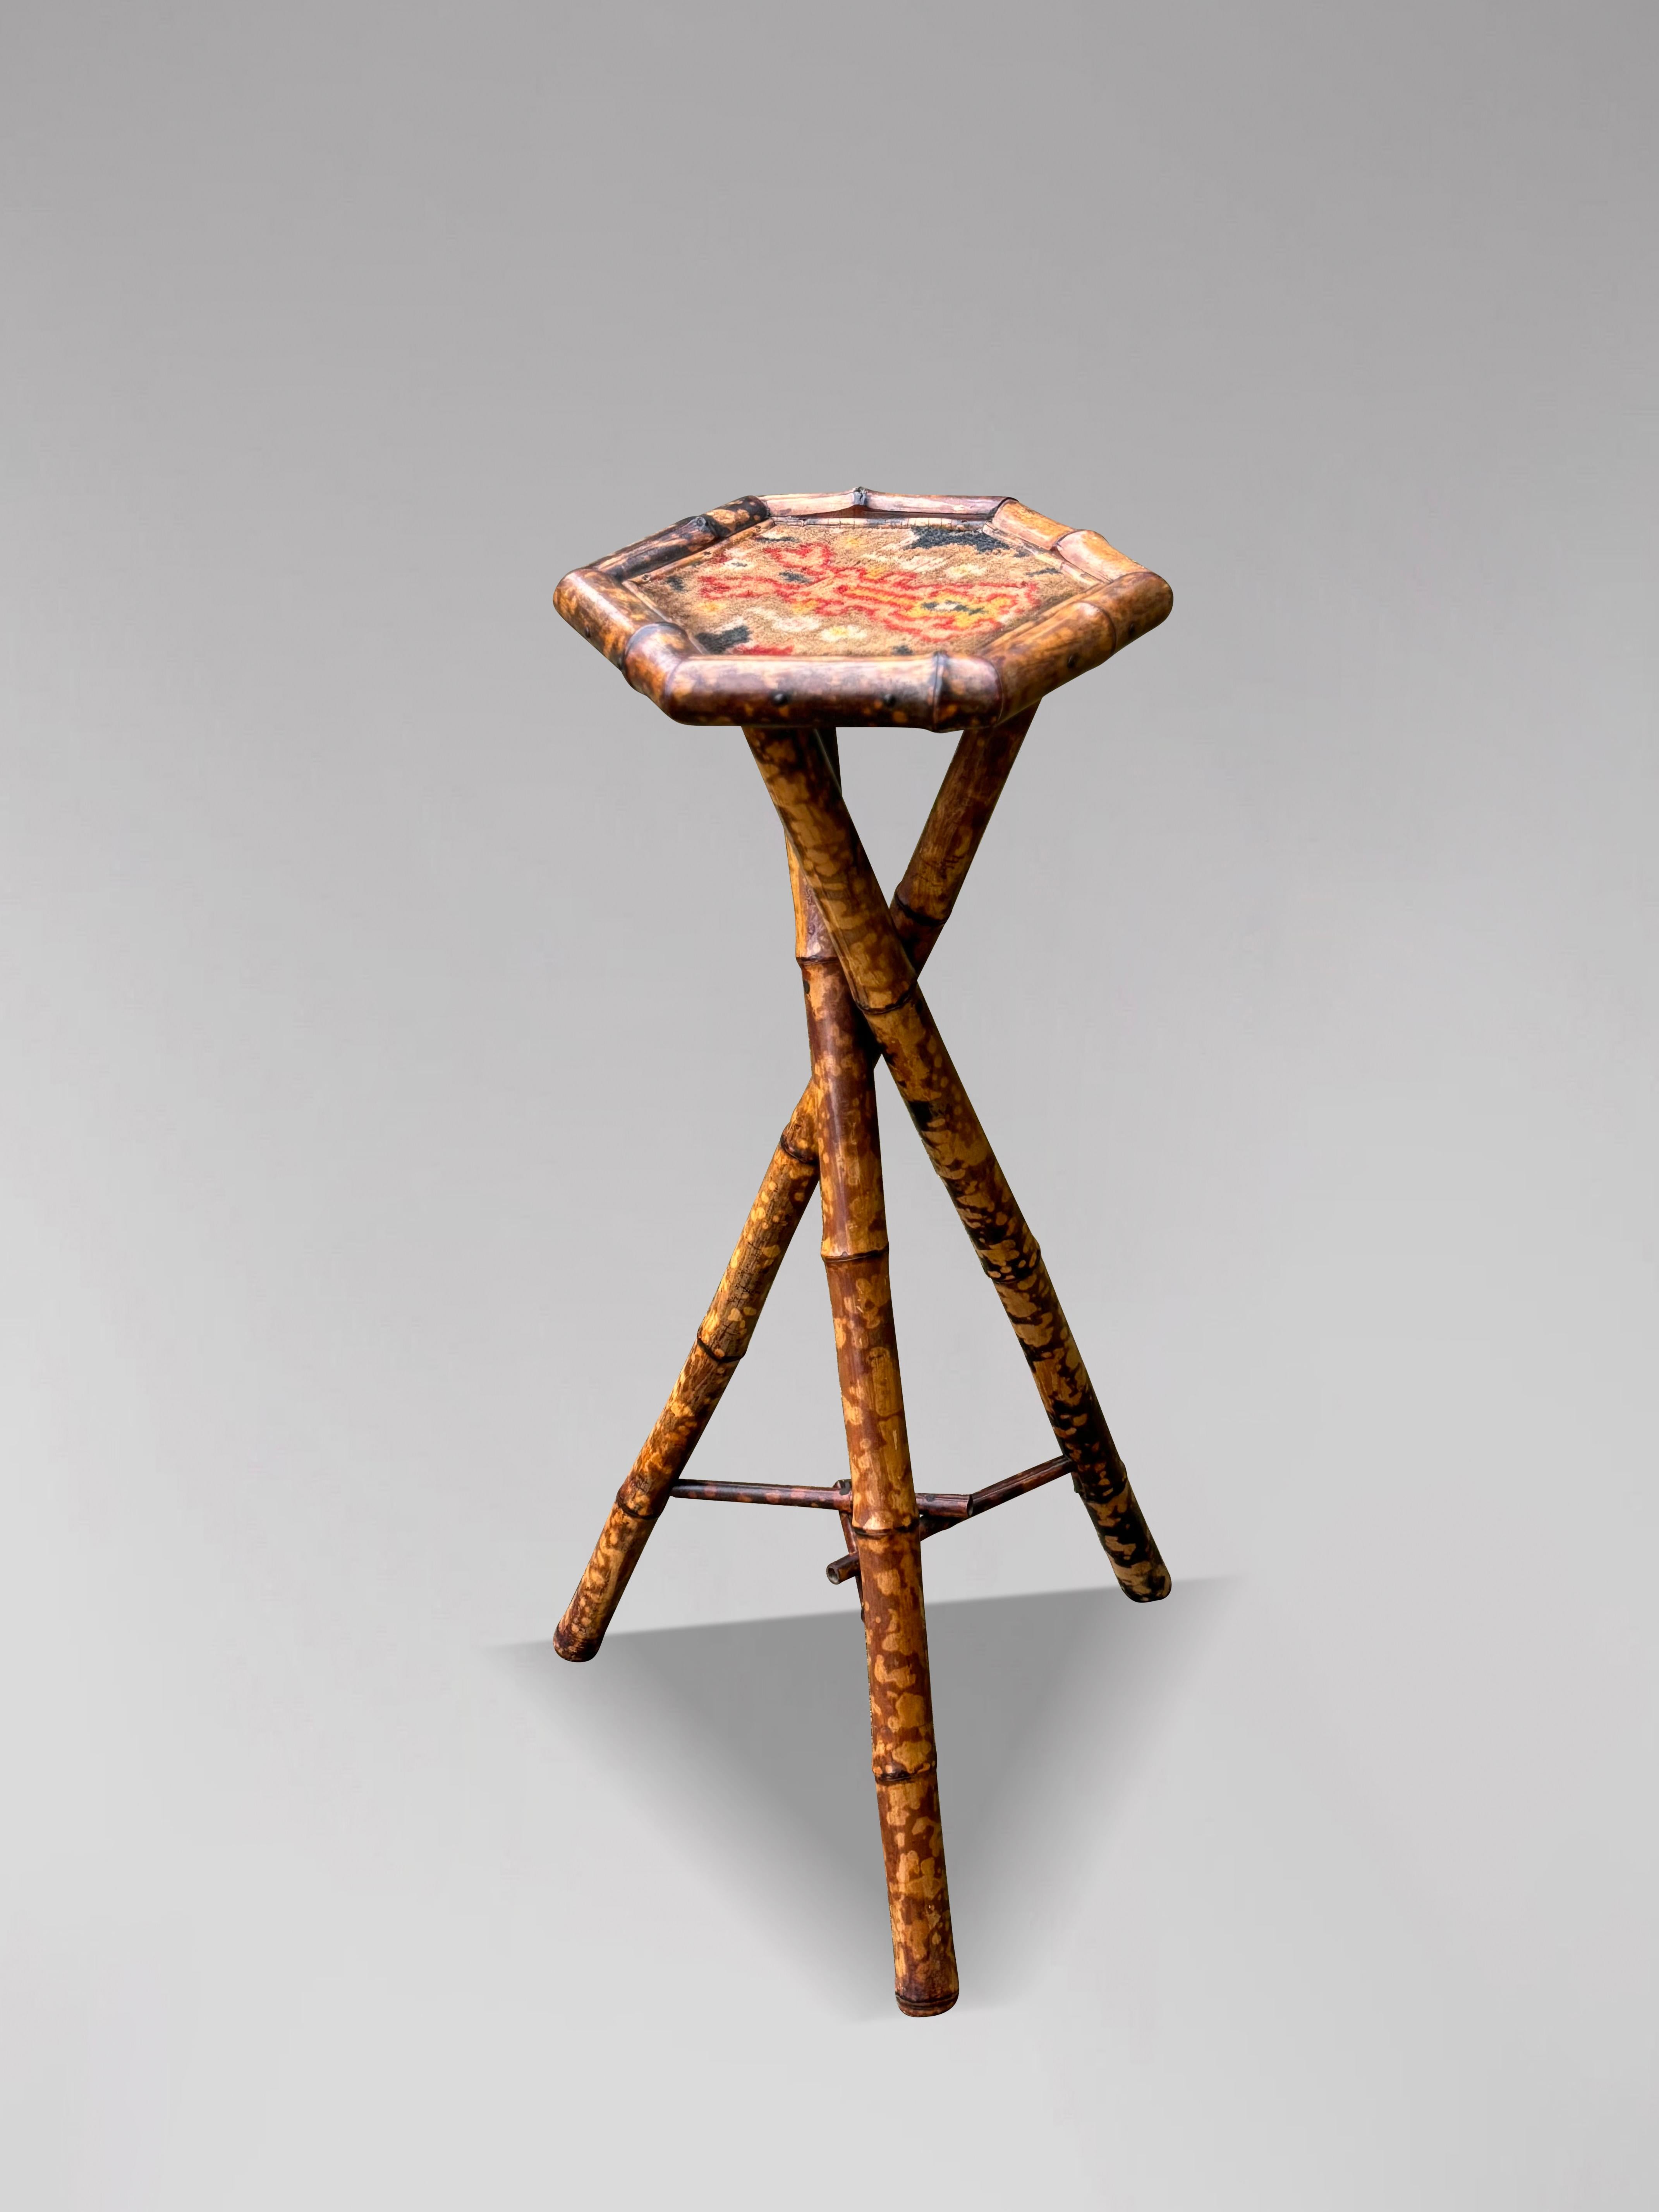 A late 19th century Victorian period tiger bamboo plant stand or tall table. Hexagonal top with border detail raised on a bamboo tripod base with twisted cross section leg formation united by stretchers. Great patina.

The dimensions are:
Height: